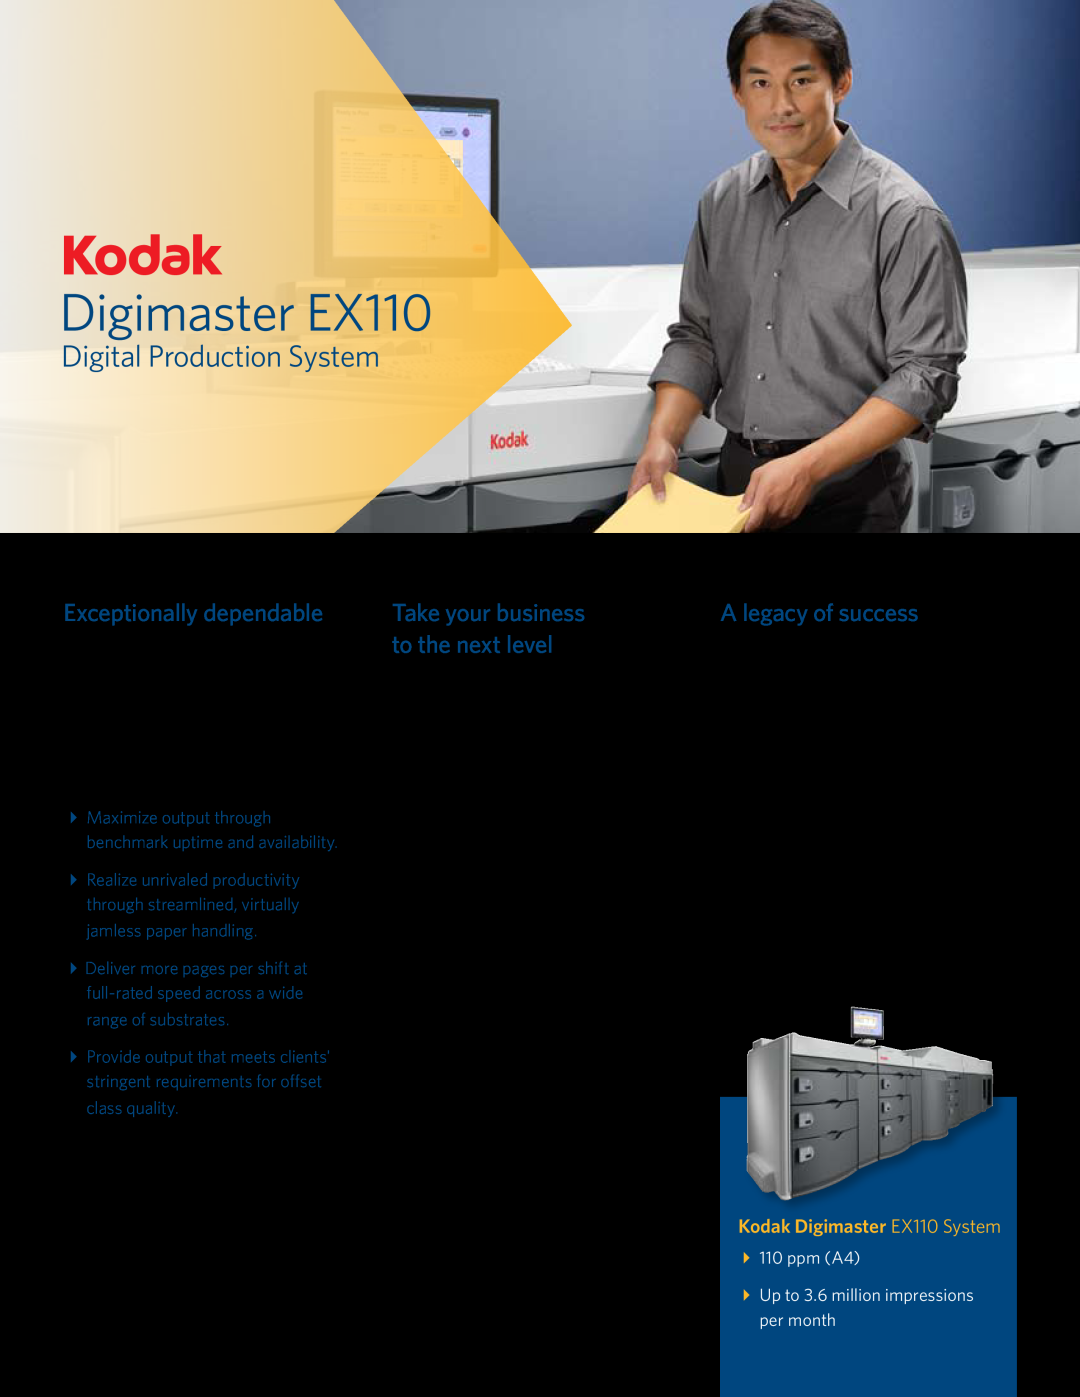 Kodak manual Digimaster EX110, Digital Production System, Exceptionally dependable, A legacy of success 